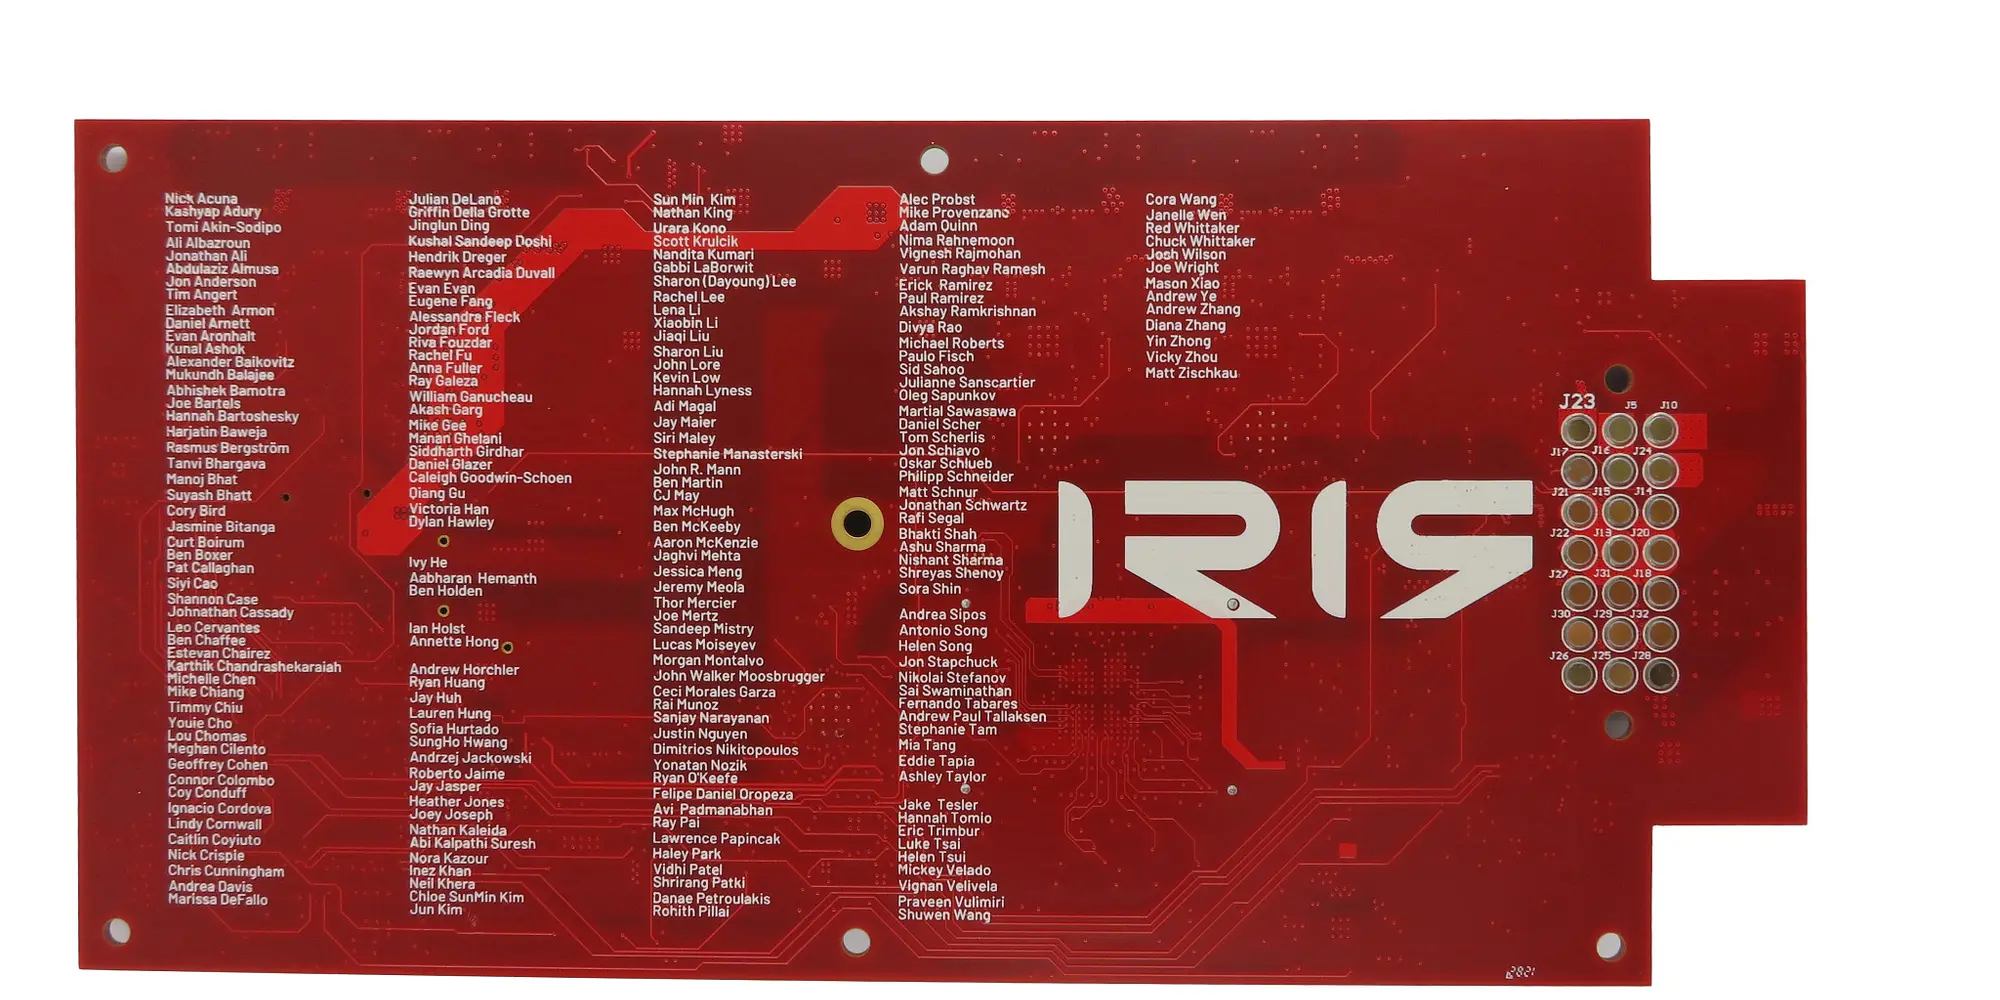 	The names of many of the people, students, staff, and faculty, who have worked on iris, were printed on its circuit board.